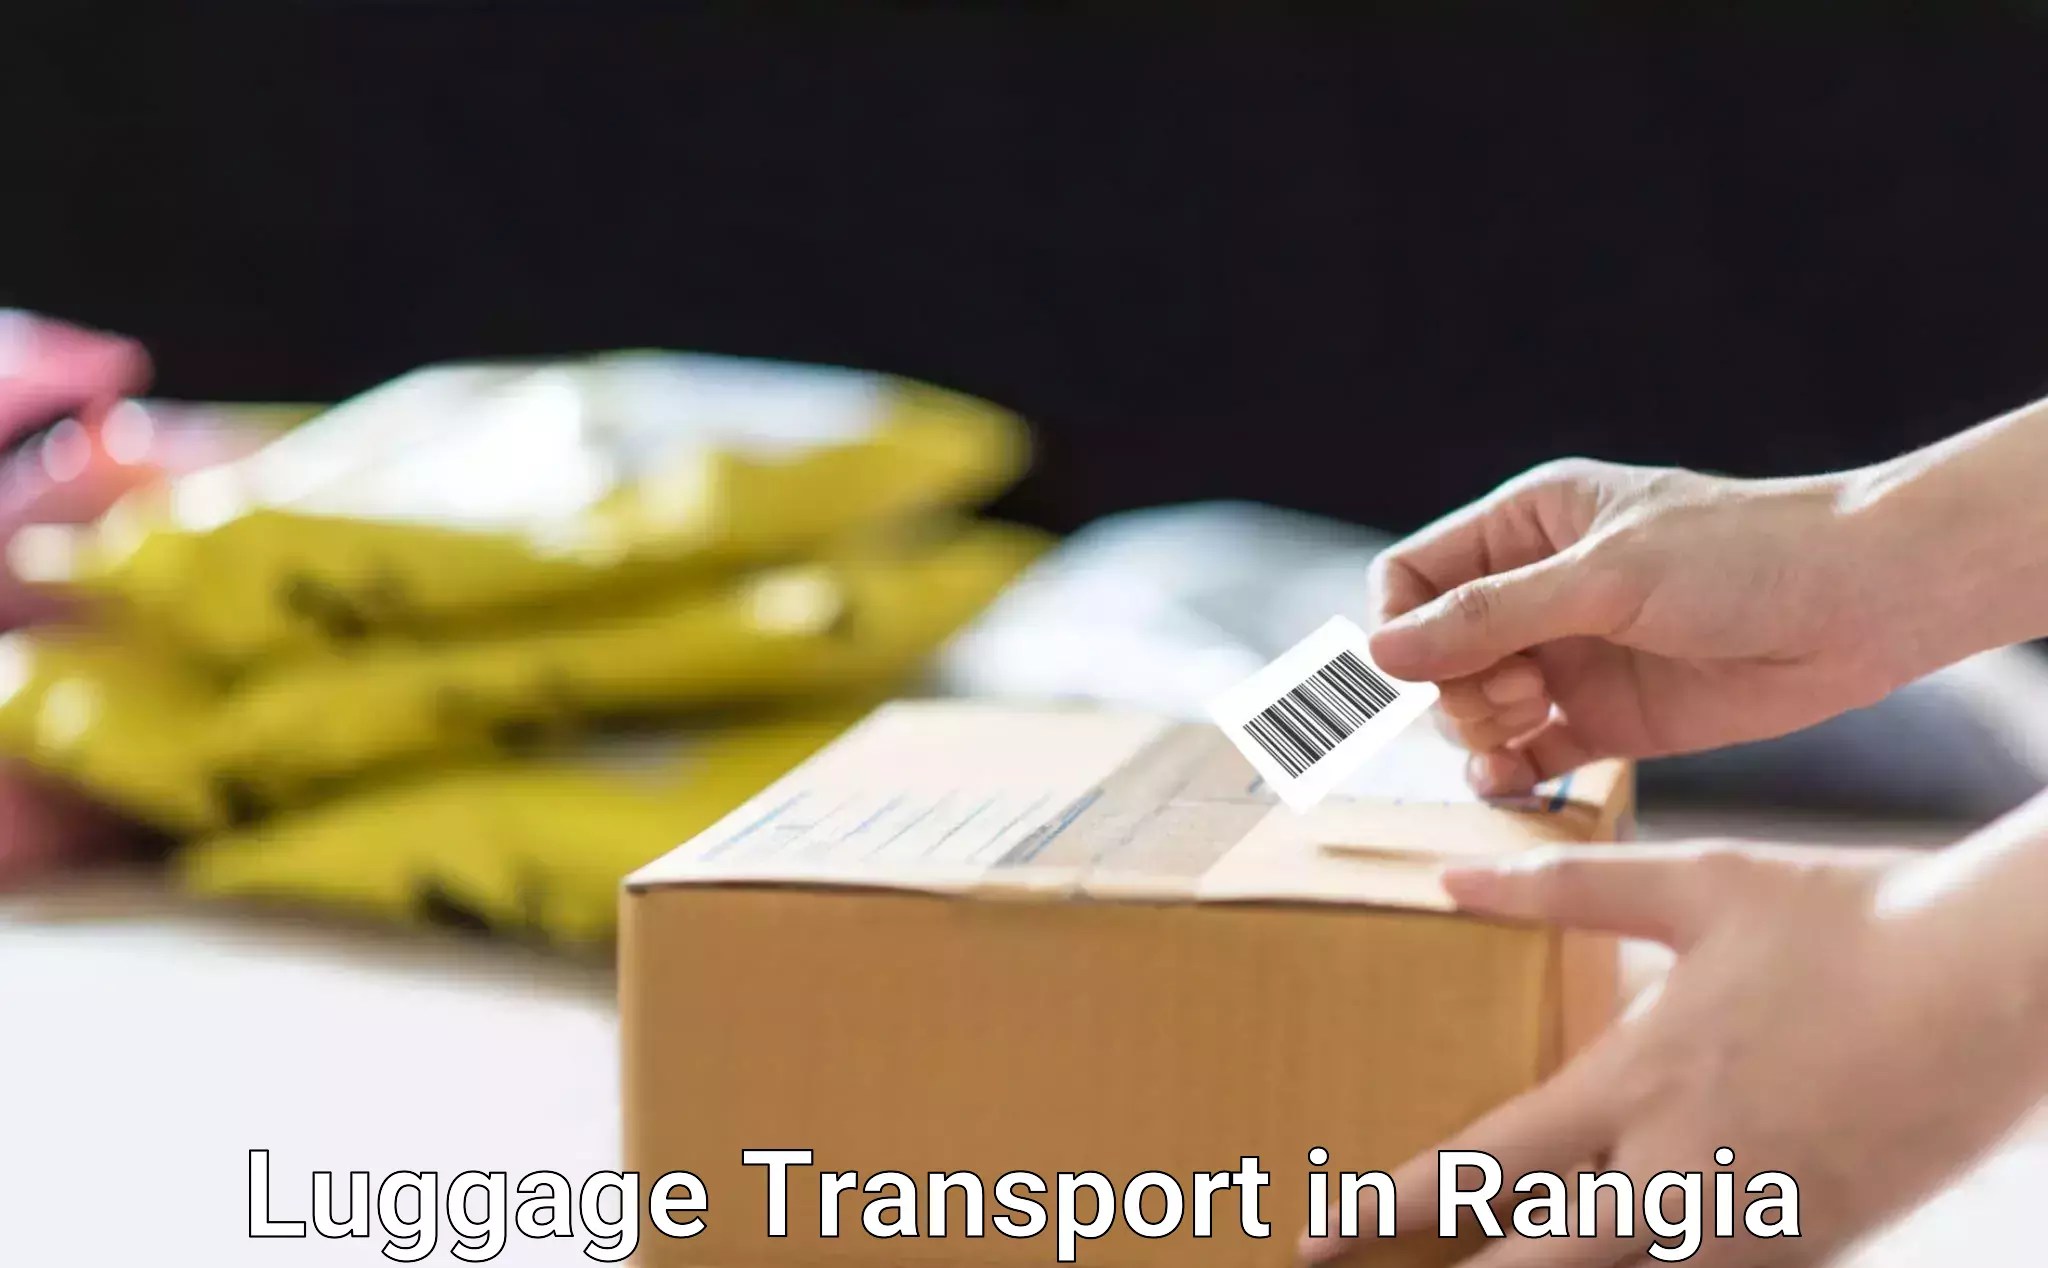 Luggage dispatch service in Rangia